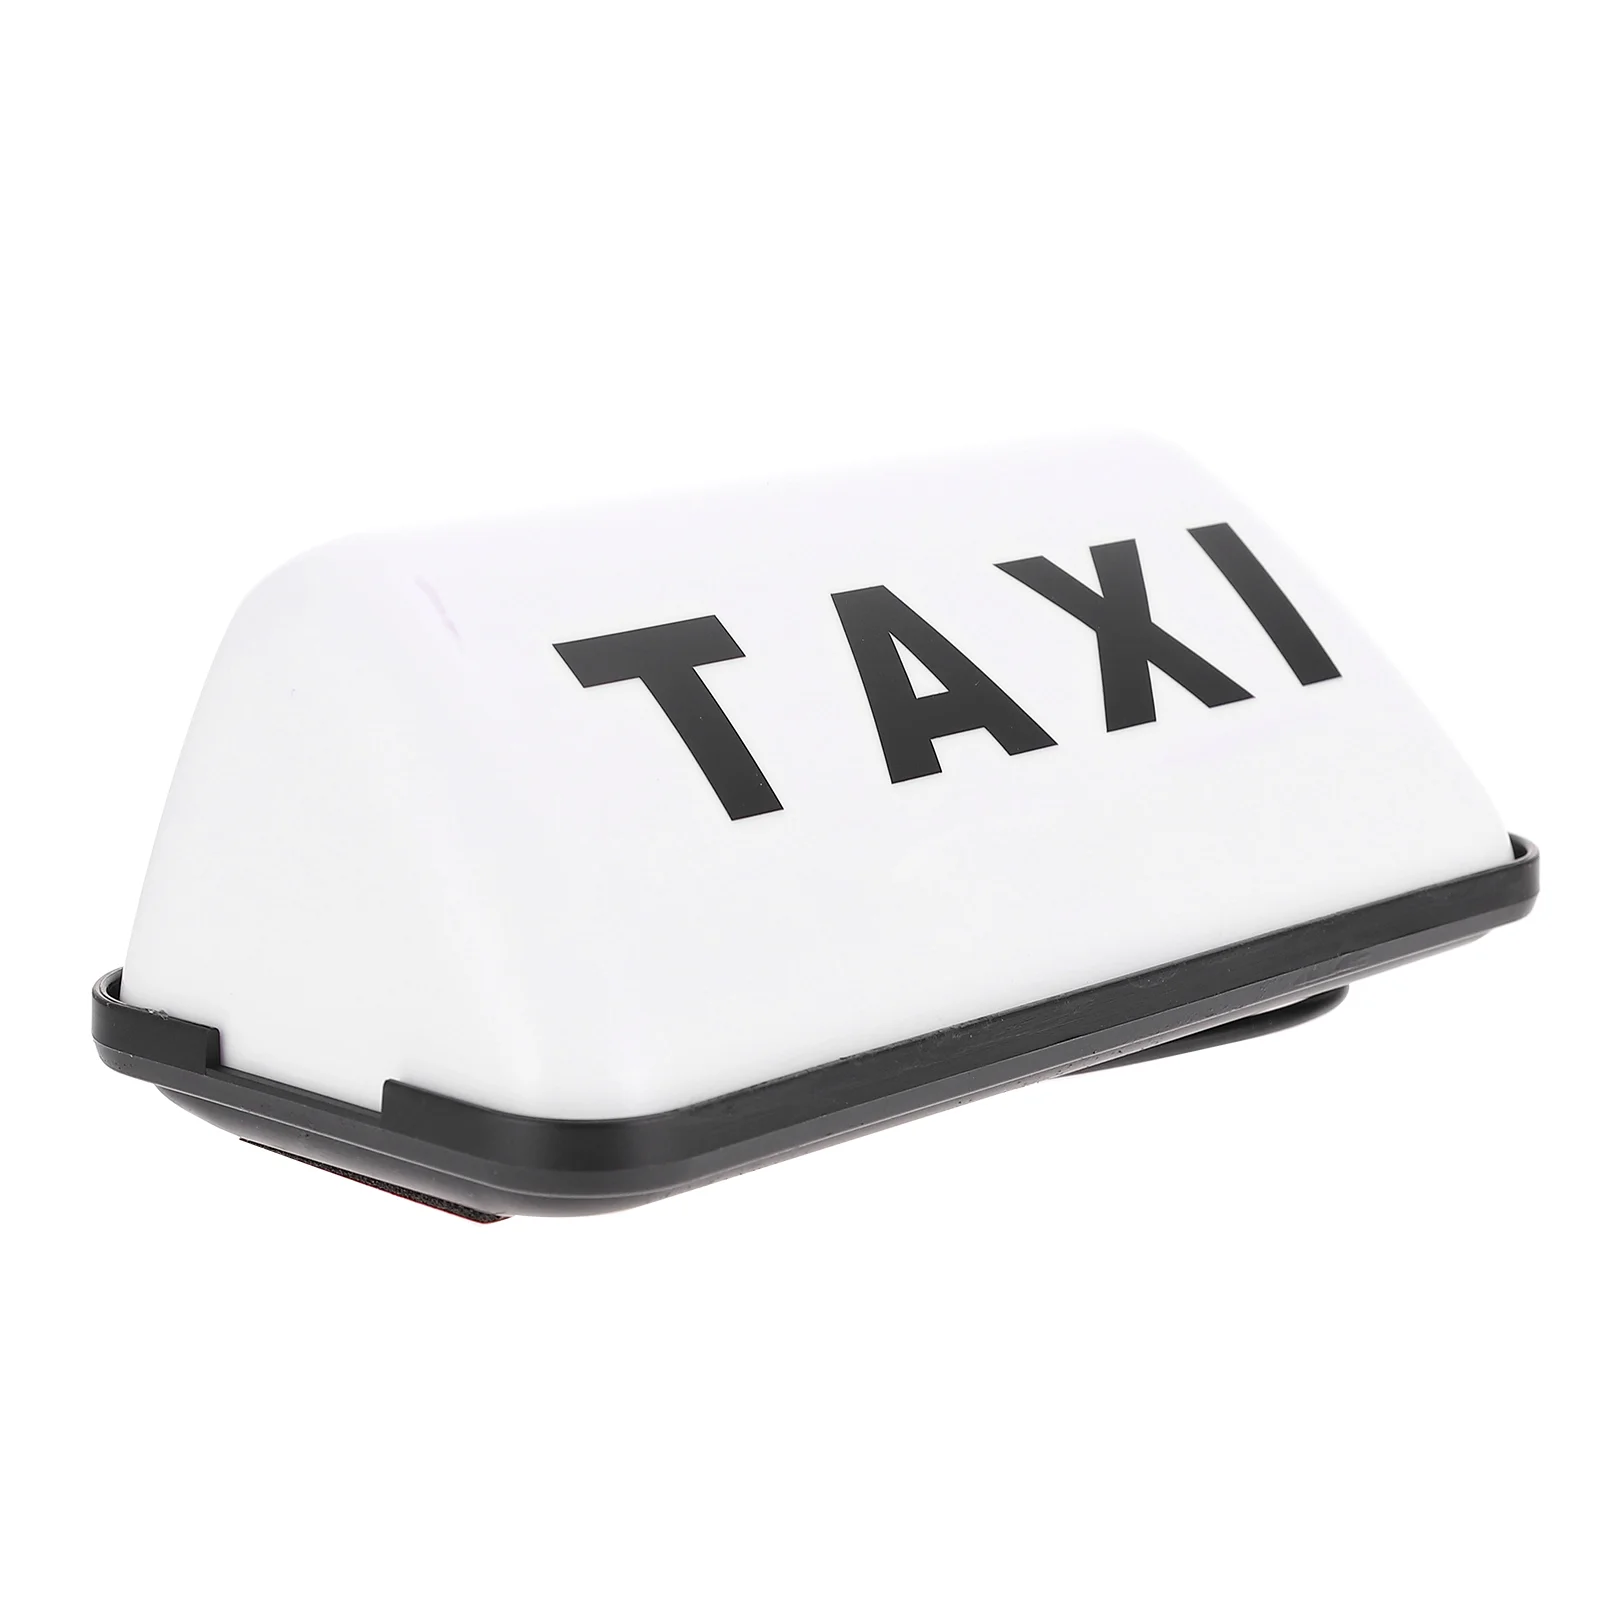 

Taxi Light Sign Led Roof Car Cab Lights Lamp Indicator Signs Illuminated Toppers Dome Topper Up Waterproof Decor Retro Neon Cat